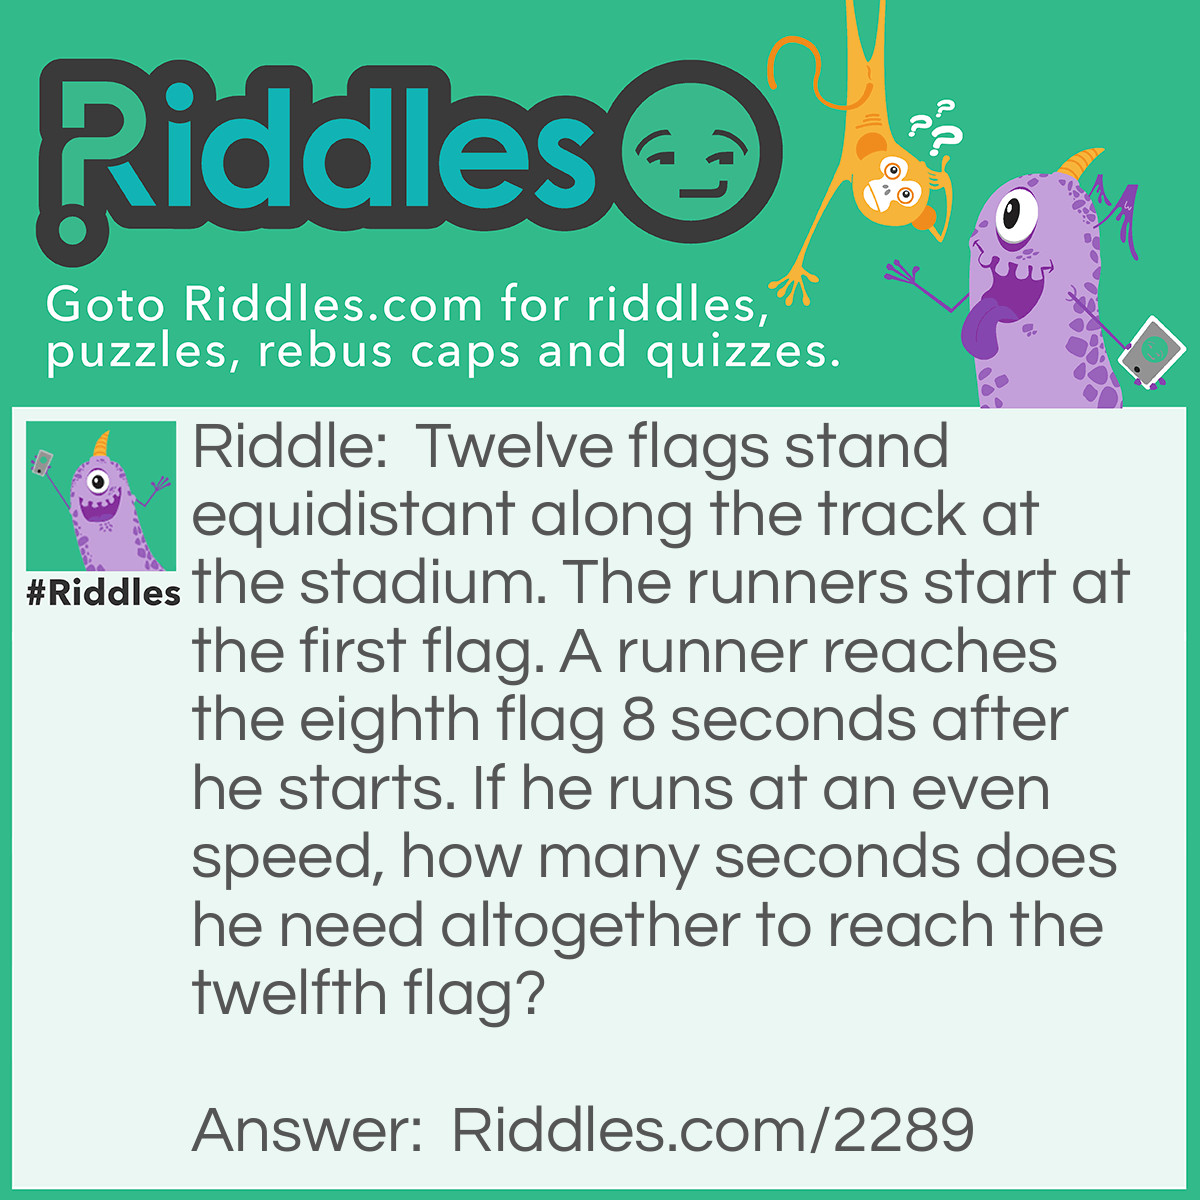 Riddle: Twelve flags stand equidistant along the track at the stadium. The runners start at the first flag. A runner reaches the eighth flag 8 seconds after he starts. If he runs at an even speed, how many seconds does he need altogether to reach the twelfth flag?
  Answer: Not 12 seconds. There are 7 segments from the first flag tot the eighth, and 11 from the first to the twelfth. He runs each segment in 8/7 seconds; therefore, 11 segments take 88/7= 12 4/7 seconds.